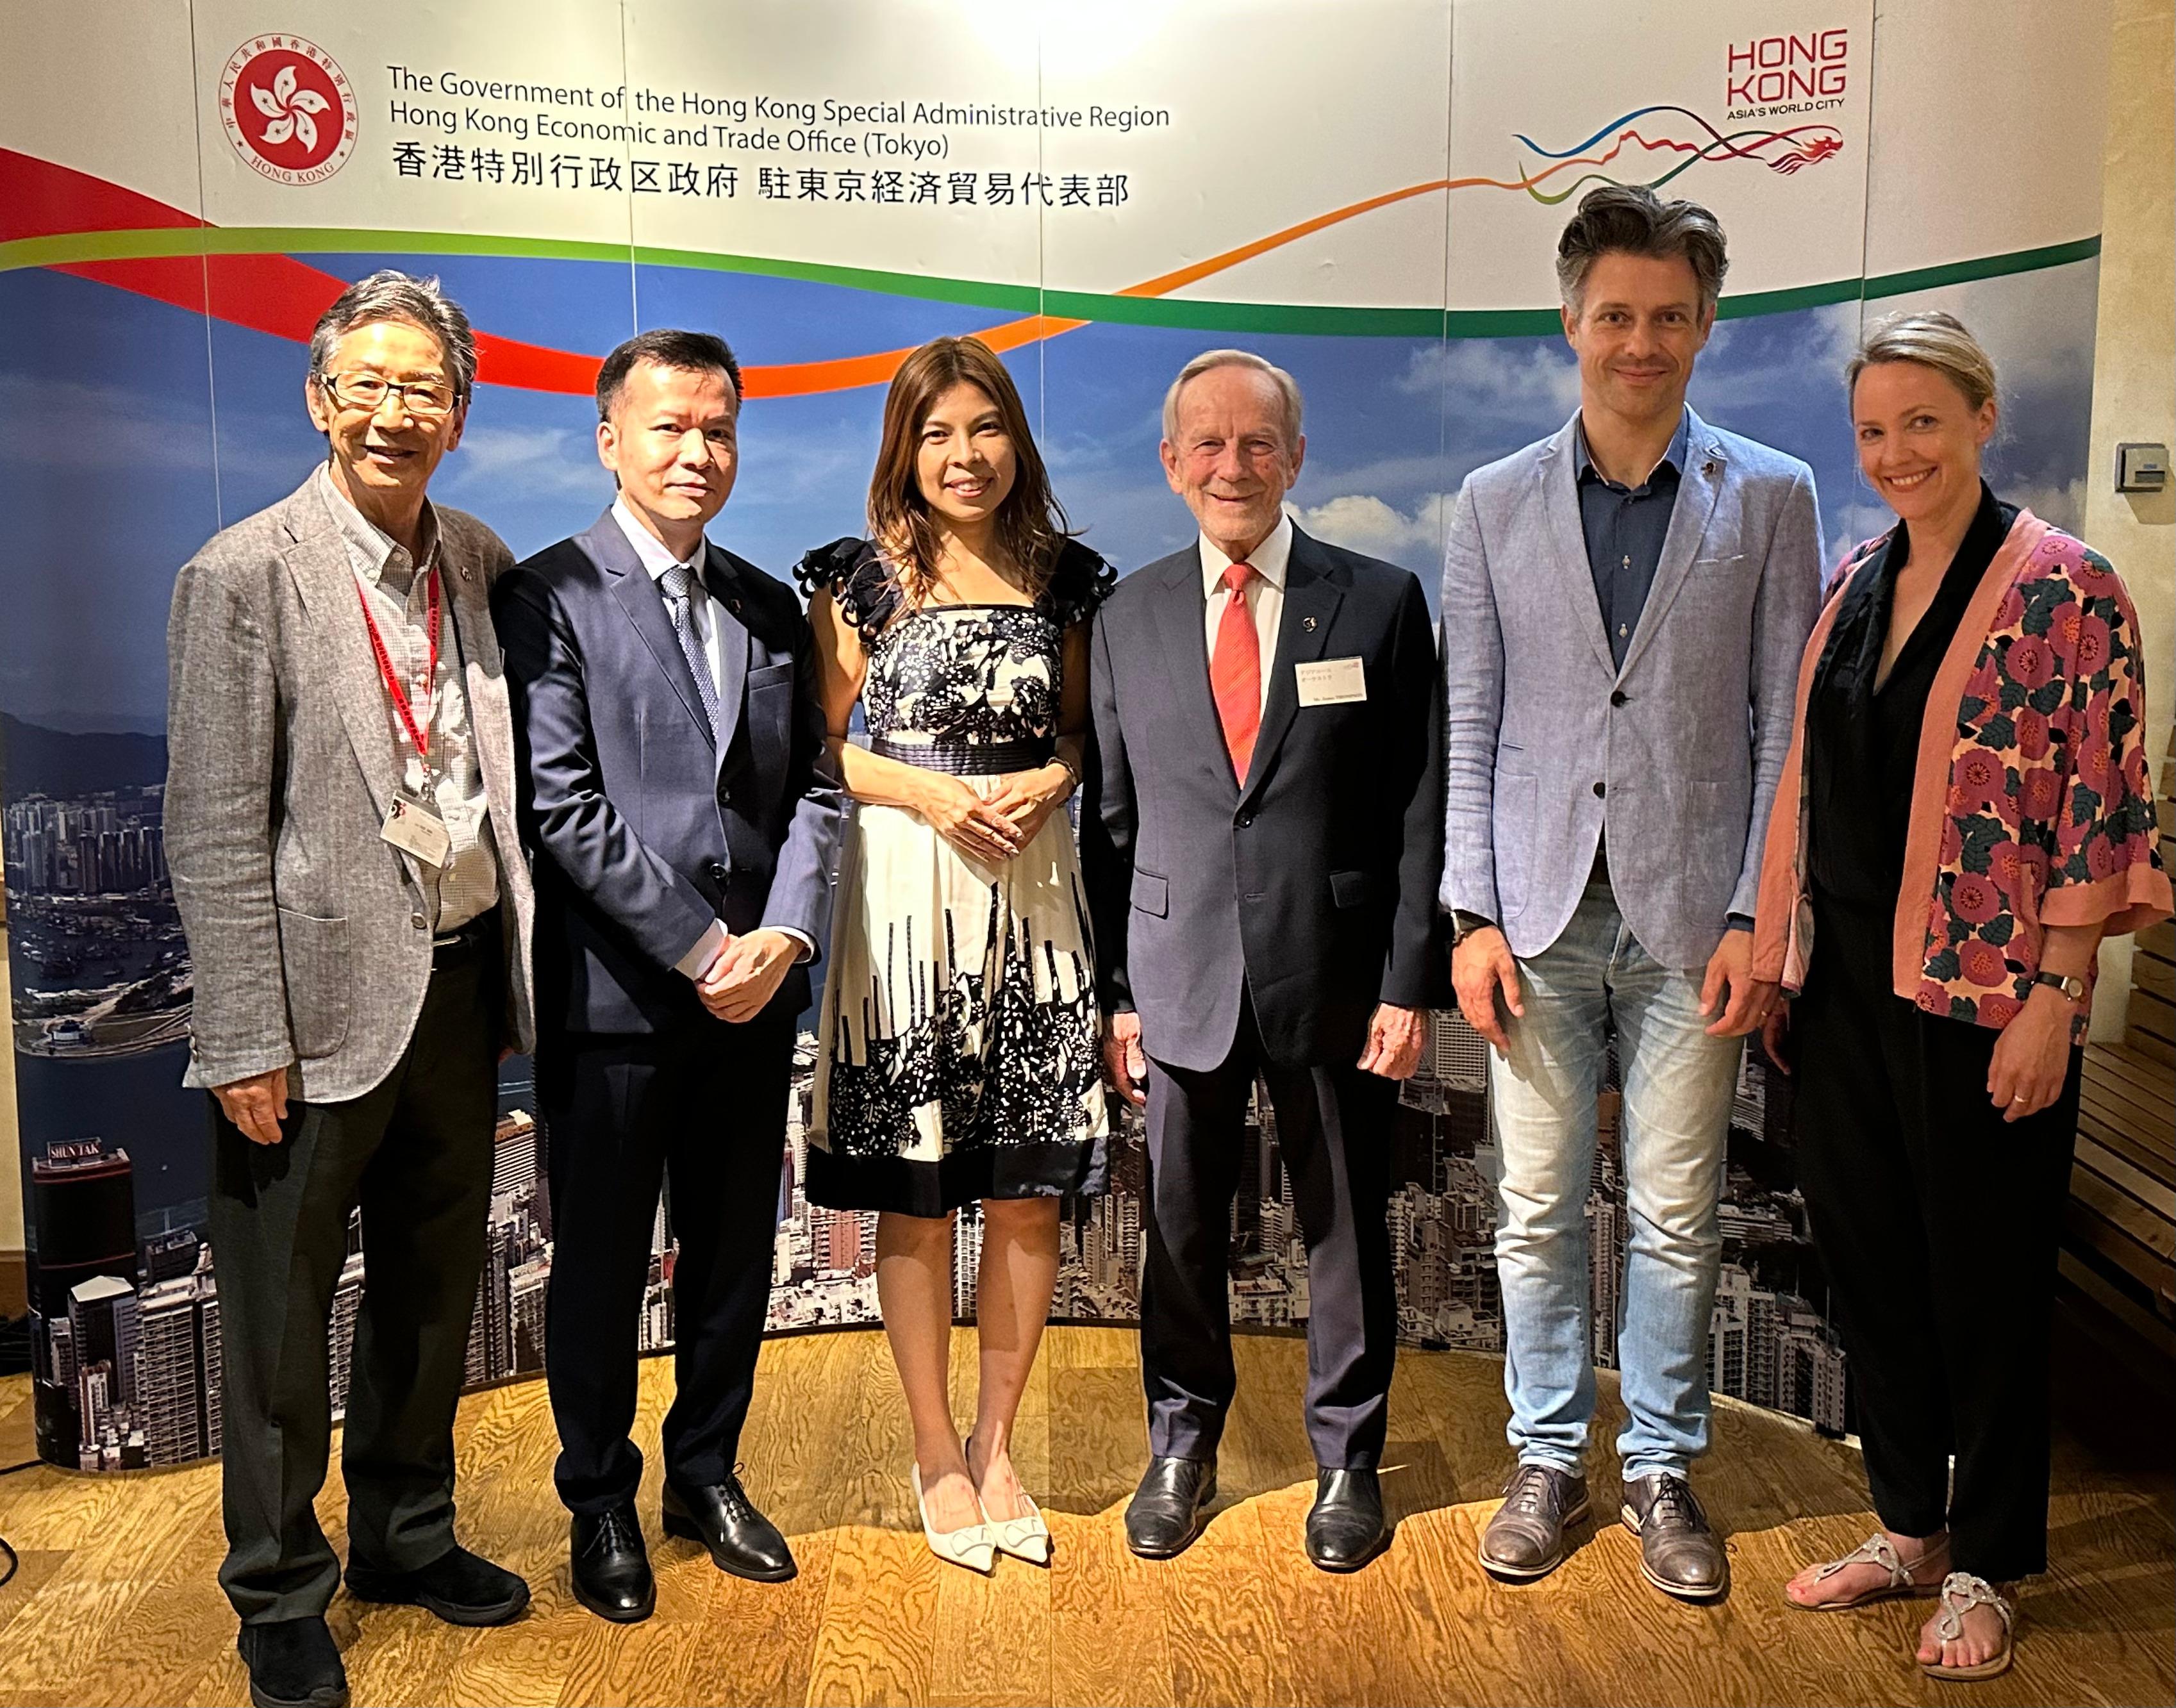 The Principal Hong Kong Economic and Trade Representative (Tokyo), Miss Winsome Au (third left), is pictured with the Asian Youth Orchestra (AYO)'s Chairman, Mr James Thompson (third right); the Chief Executive Officer, Mr Keith Lau (second left); the Representative, Japan, Mr Kano Kunio (first left); the Principal Conductor, Mr Joseph Bastian (second right); and Soprano Ms Lydia Teuscher (first right) before a concert at the Tokyo Opera City Concert Hall in Tokyo, Japan, today (August 31).